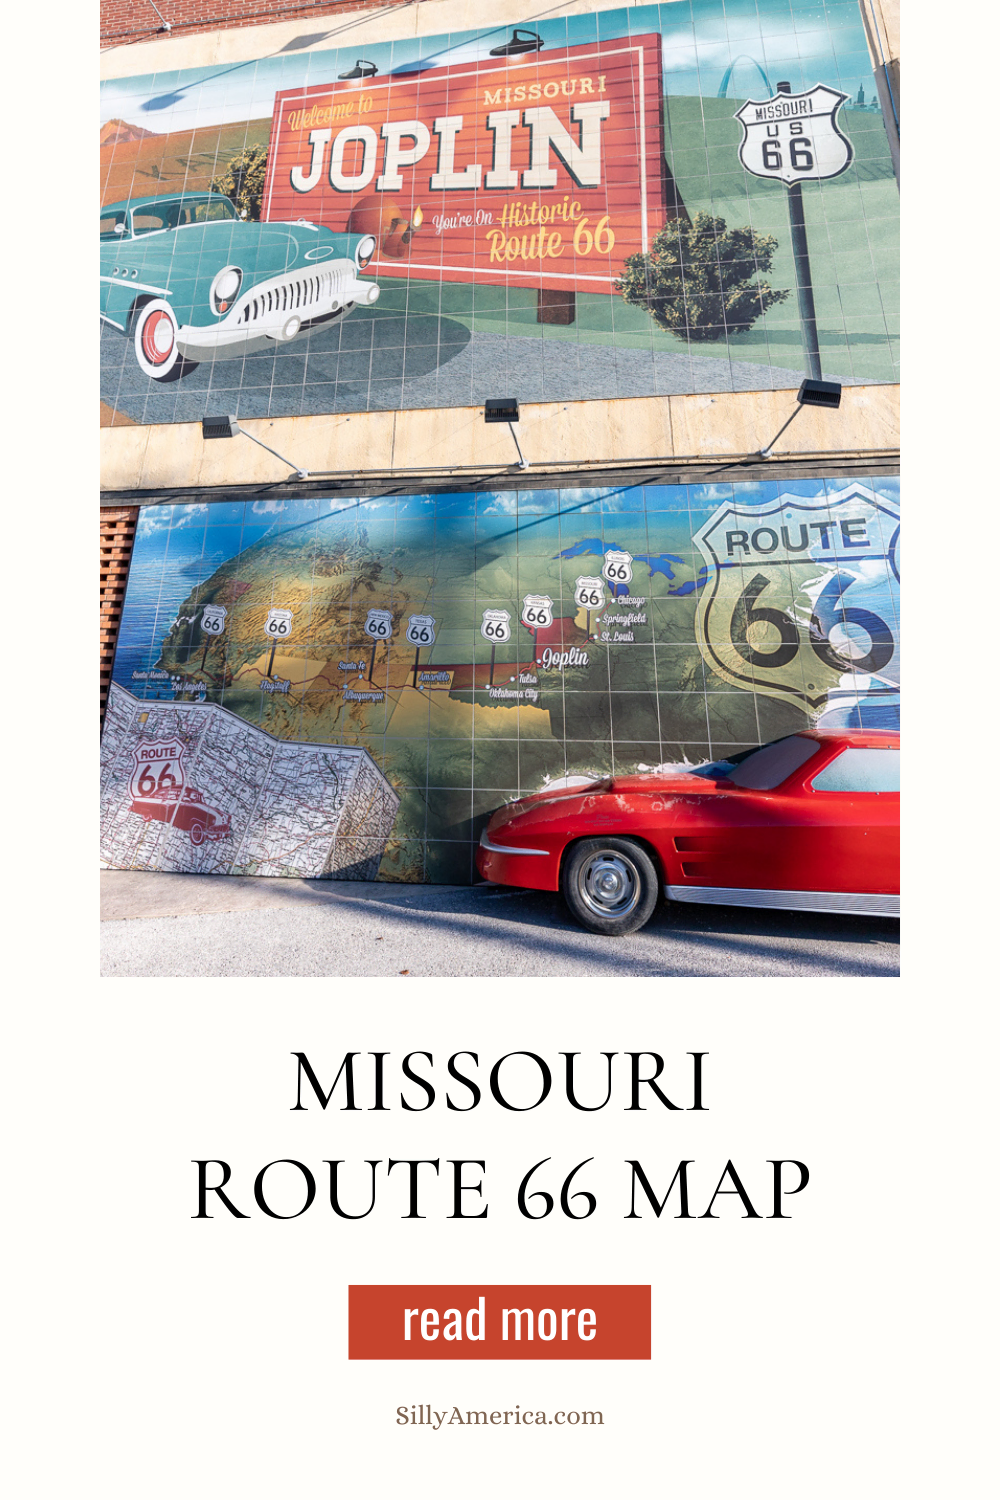 If you're planning a Route 66 road trip you need to know what to see and where to go. Our Missouri Route 66 map contains all the best stops in the state. We've mapped out all the biggest and best roadside attractions, visitor centers, museums, parks, themed gas stations, restaurants, diners, fast food, vintage motels, and other iconic stops on this Route 66 Missouri map. #Route66 #Missouri #Route66RoadTrip #MissouriRoute66 #MissouriRoute66RoadTrip #MissouriRoadTrip #travel #RoadTrip